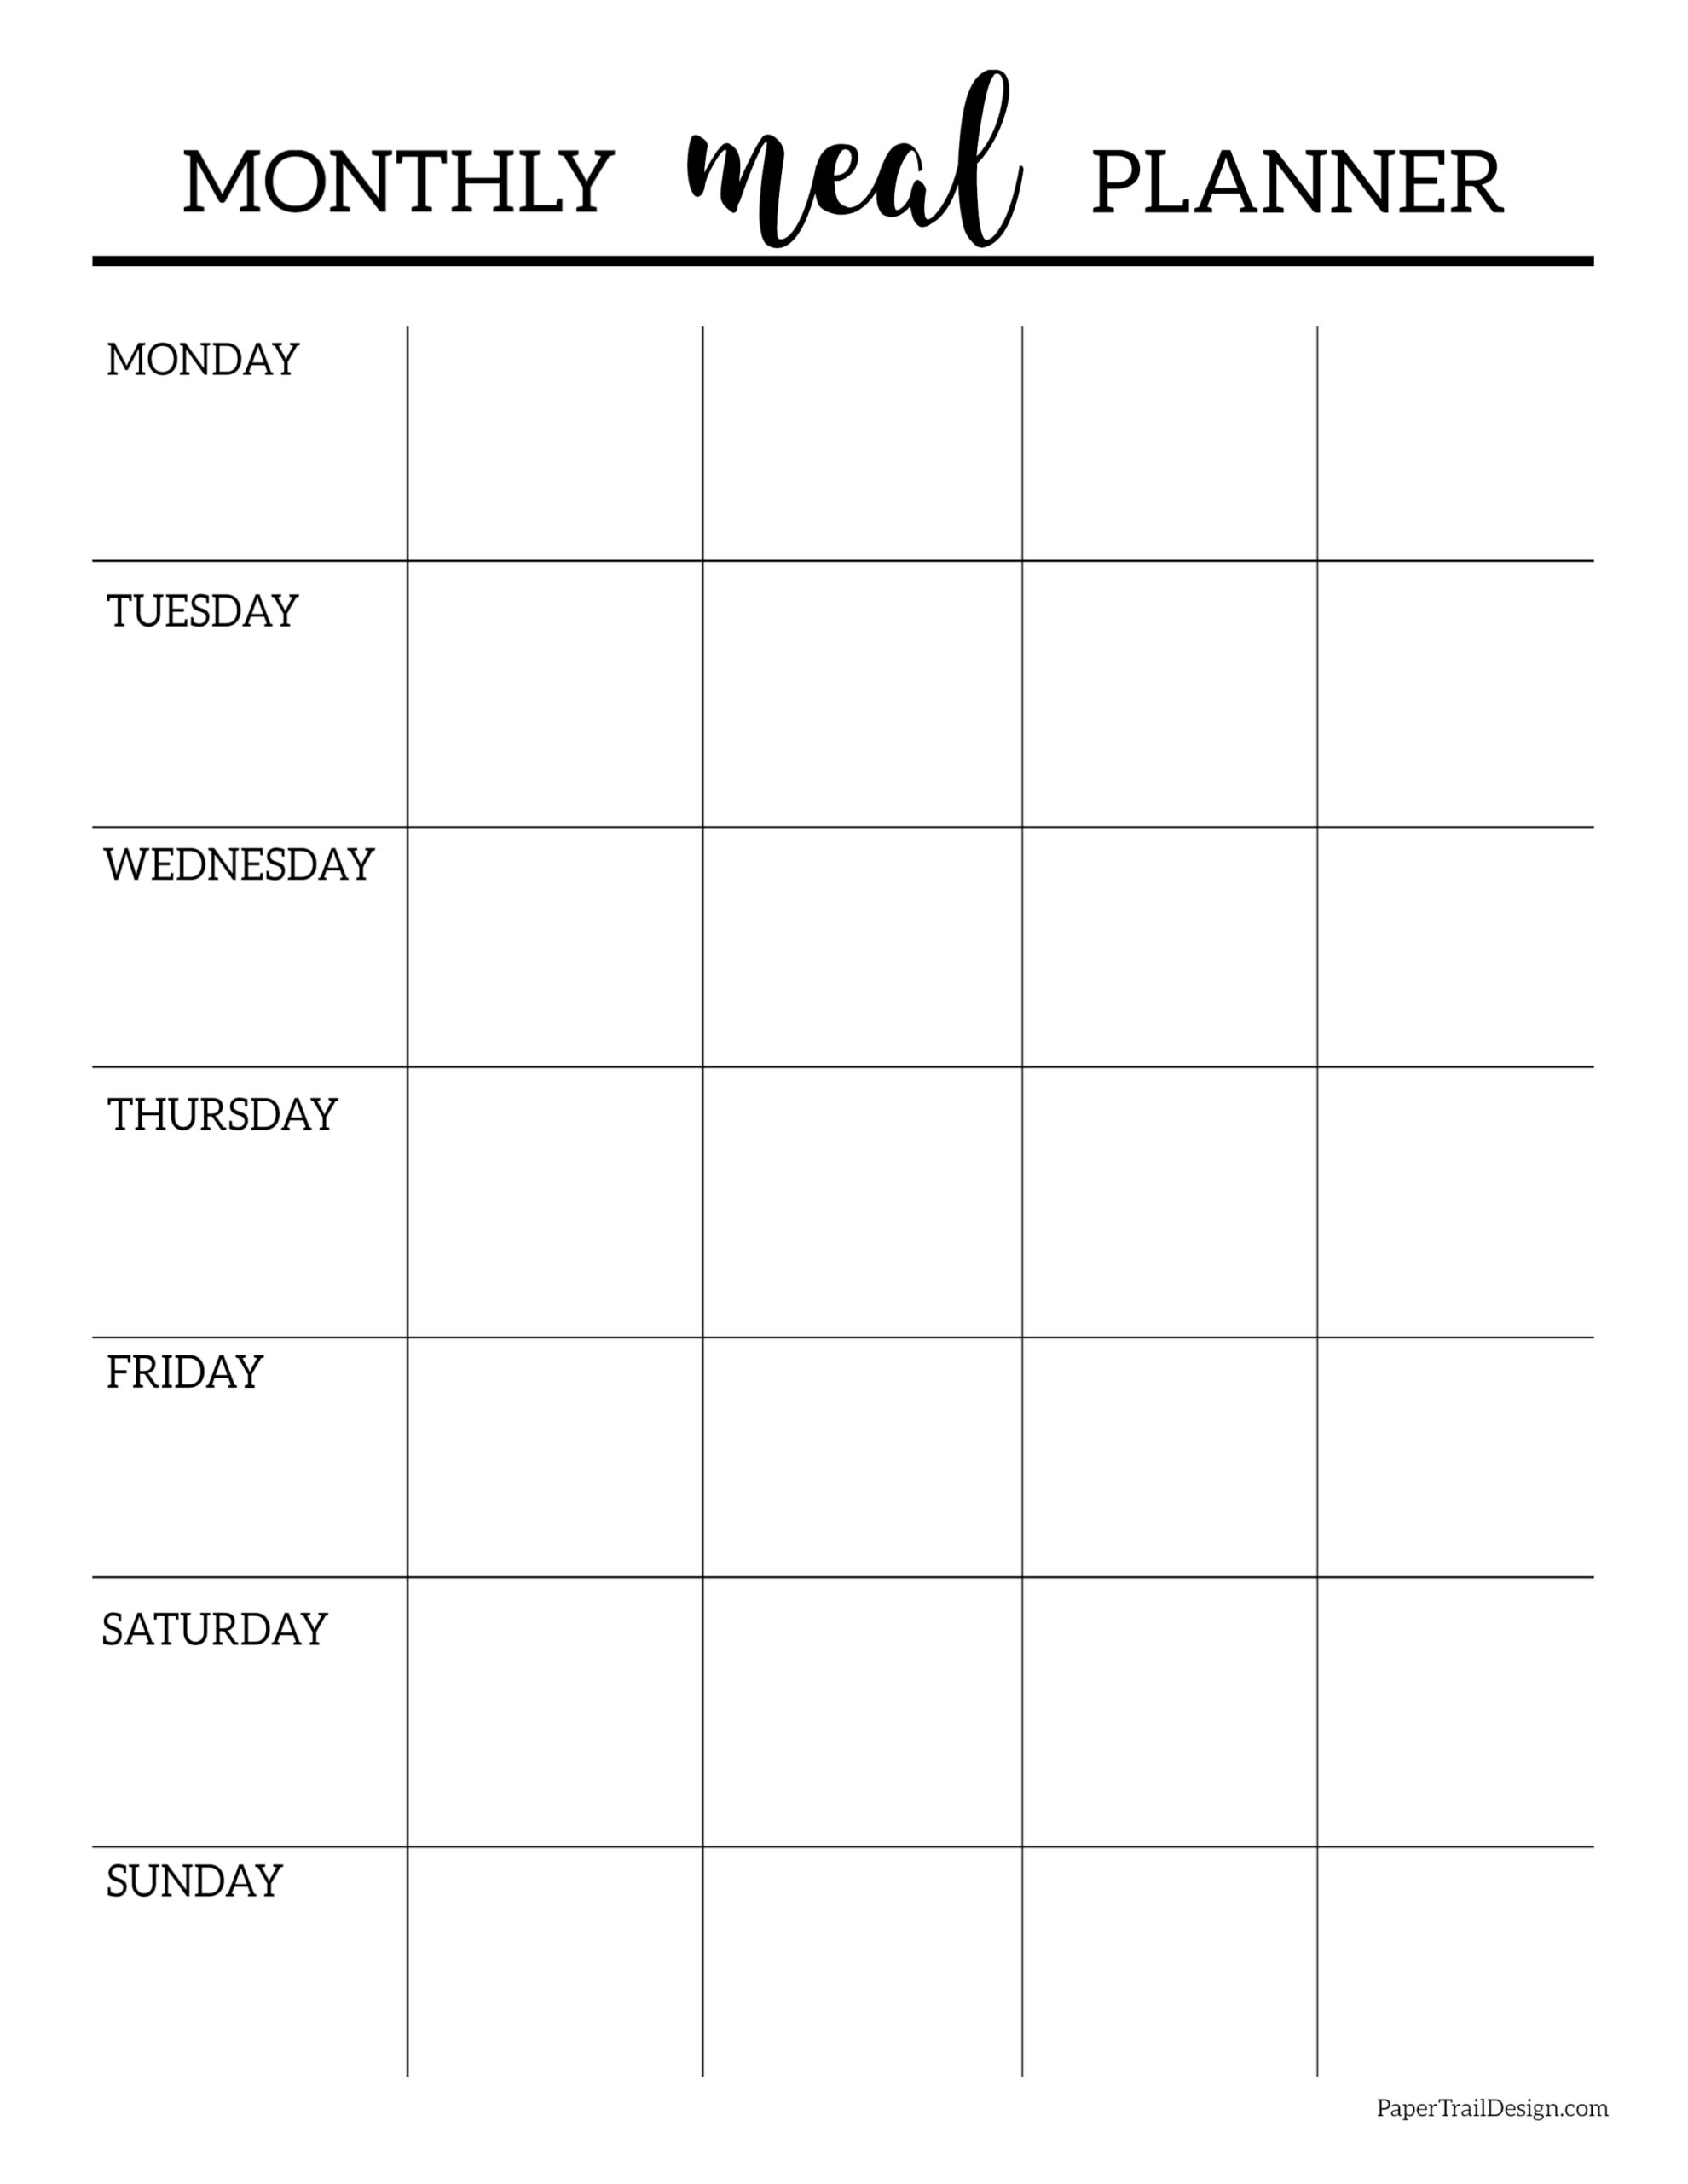 monthly meal planner free printable